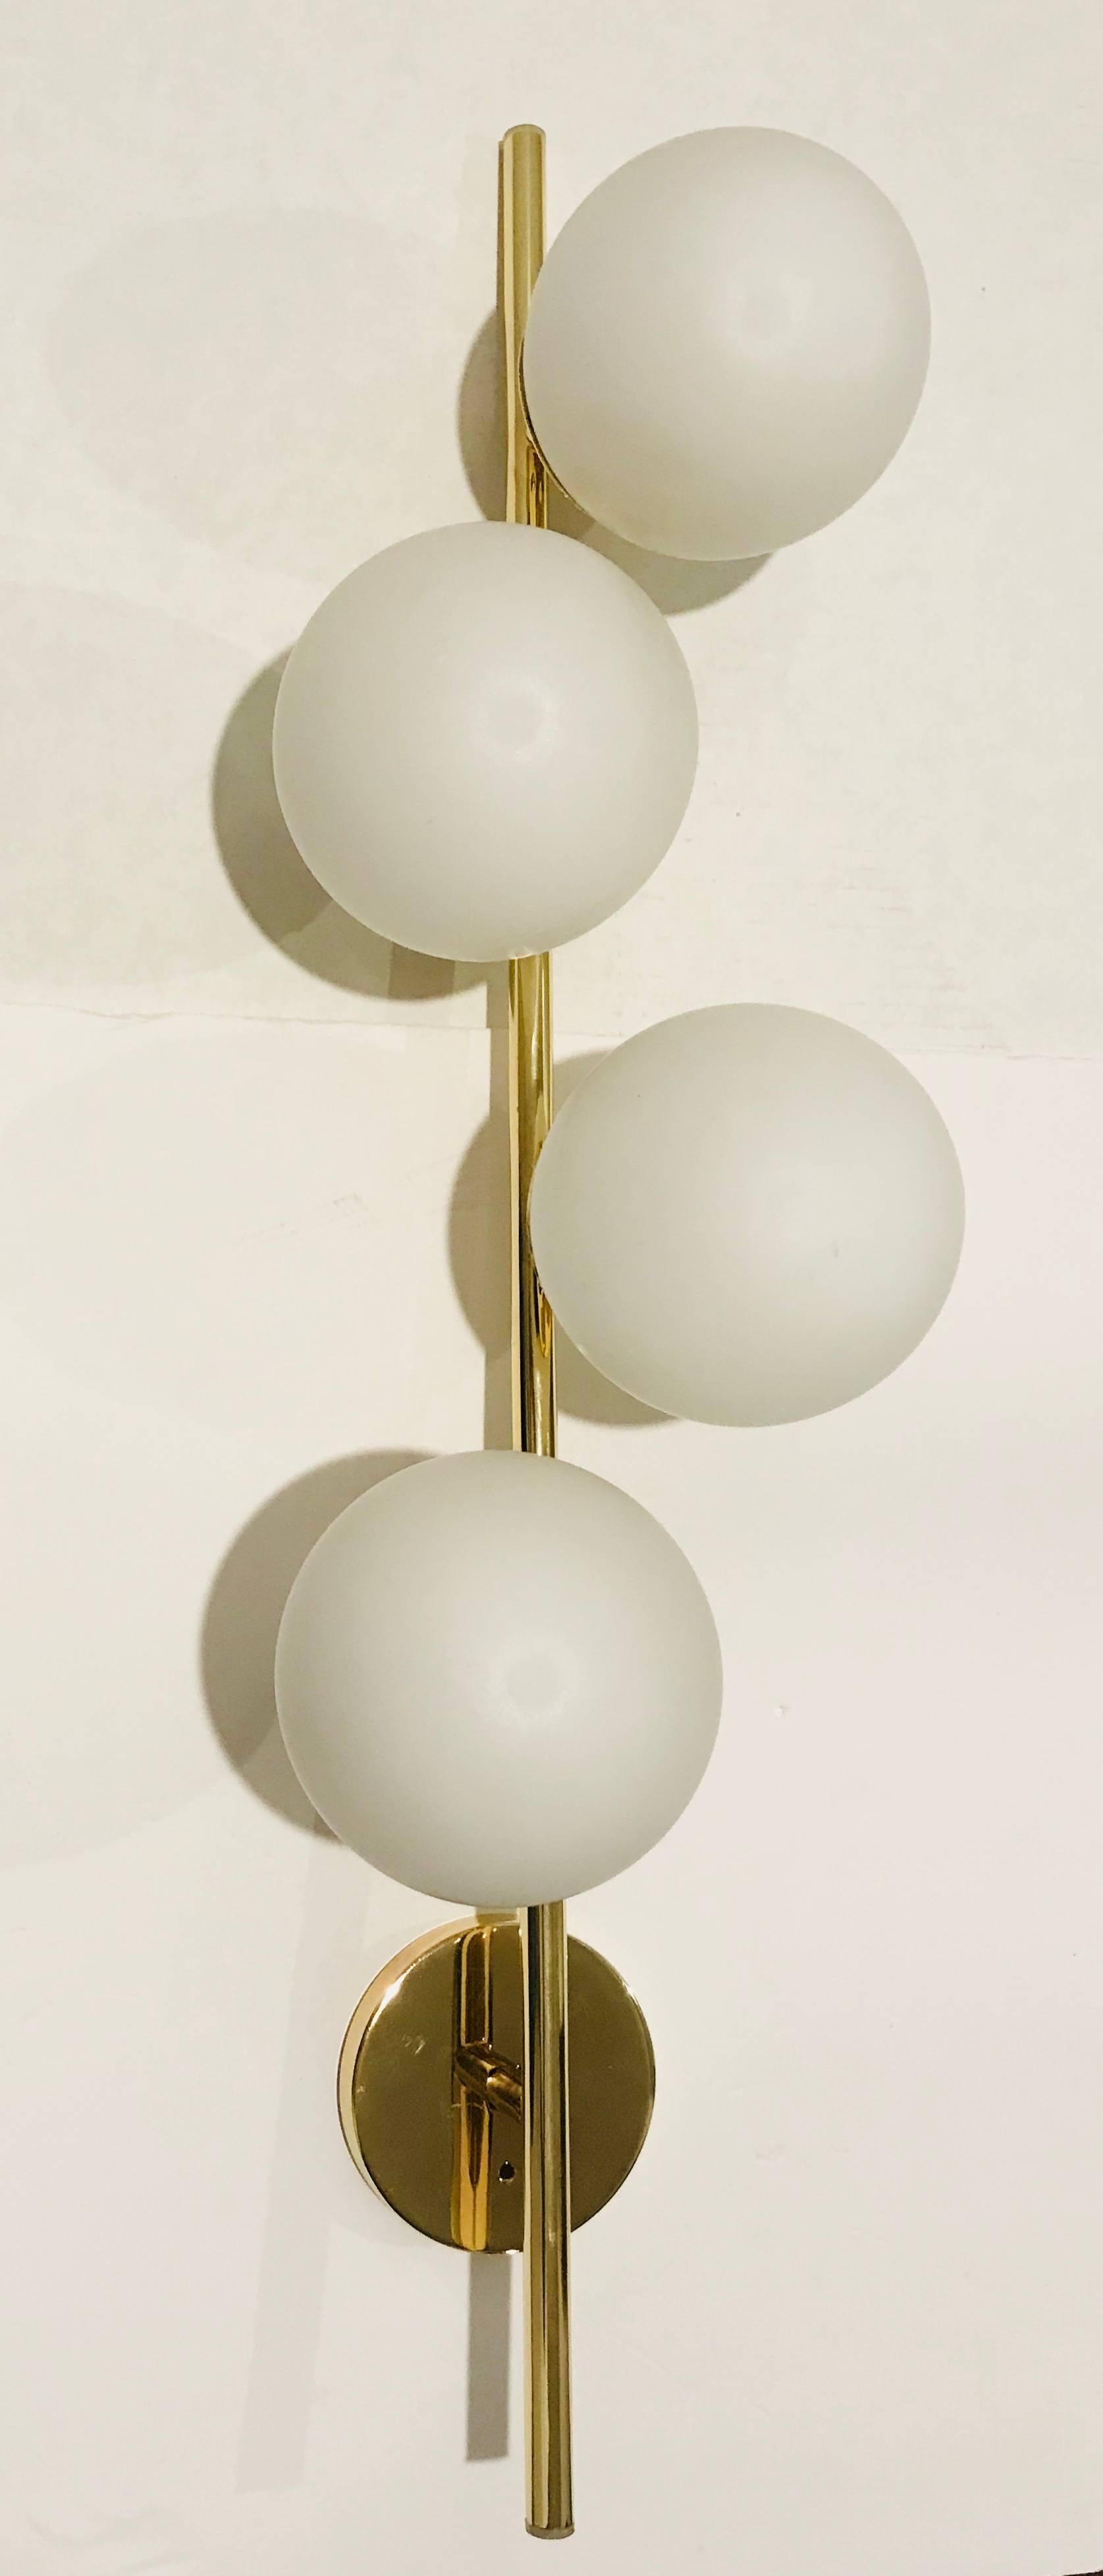 A large 1960s Italian midcentury polished brass and white frosted glass globe wall light. Newly rewired.